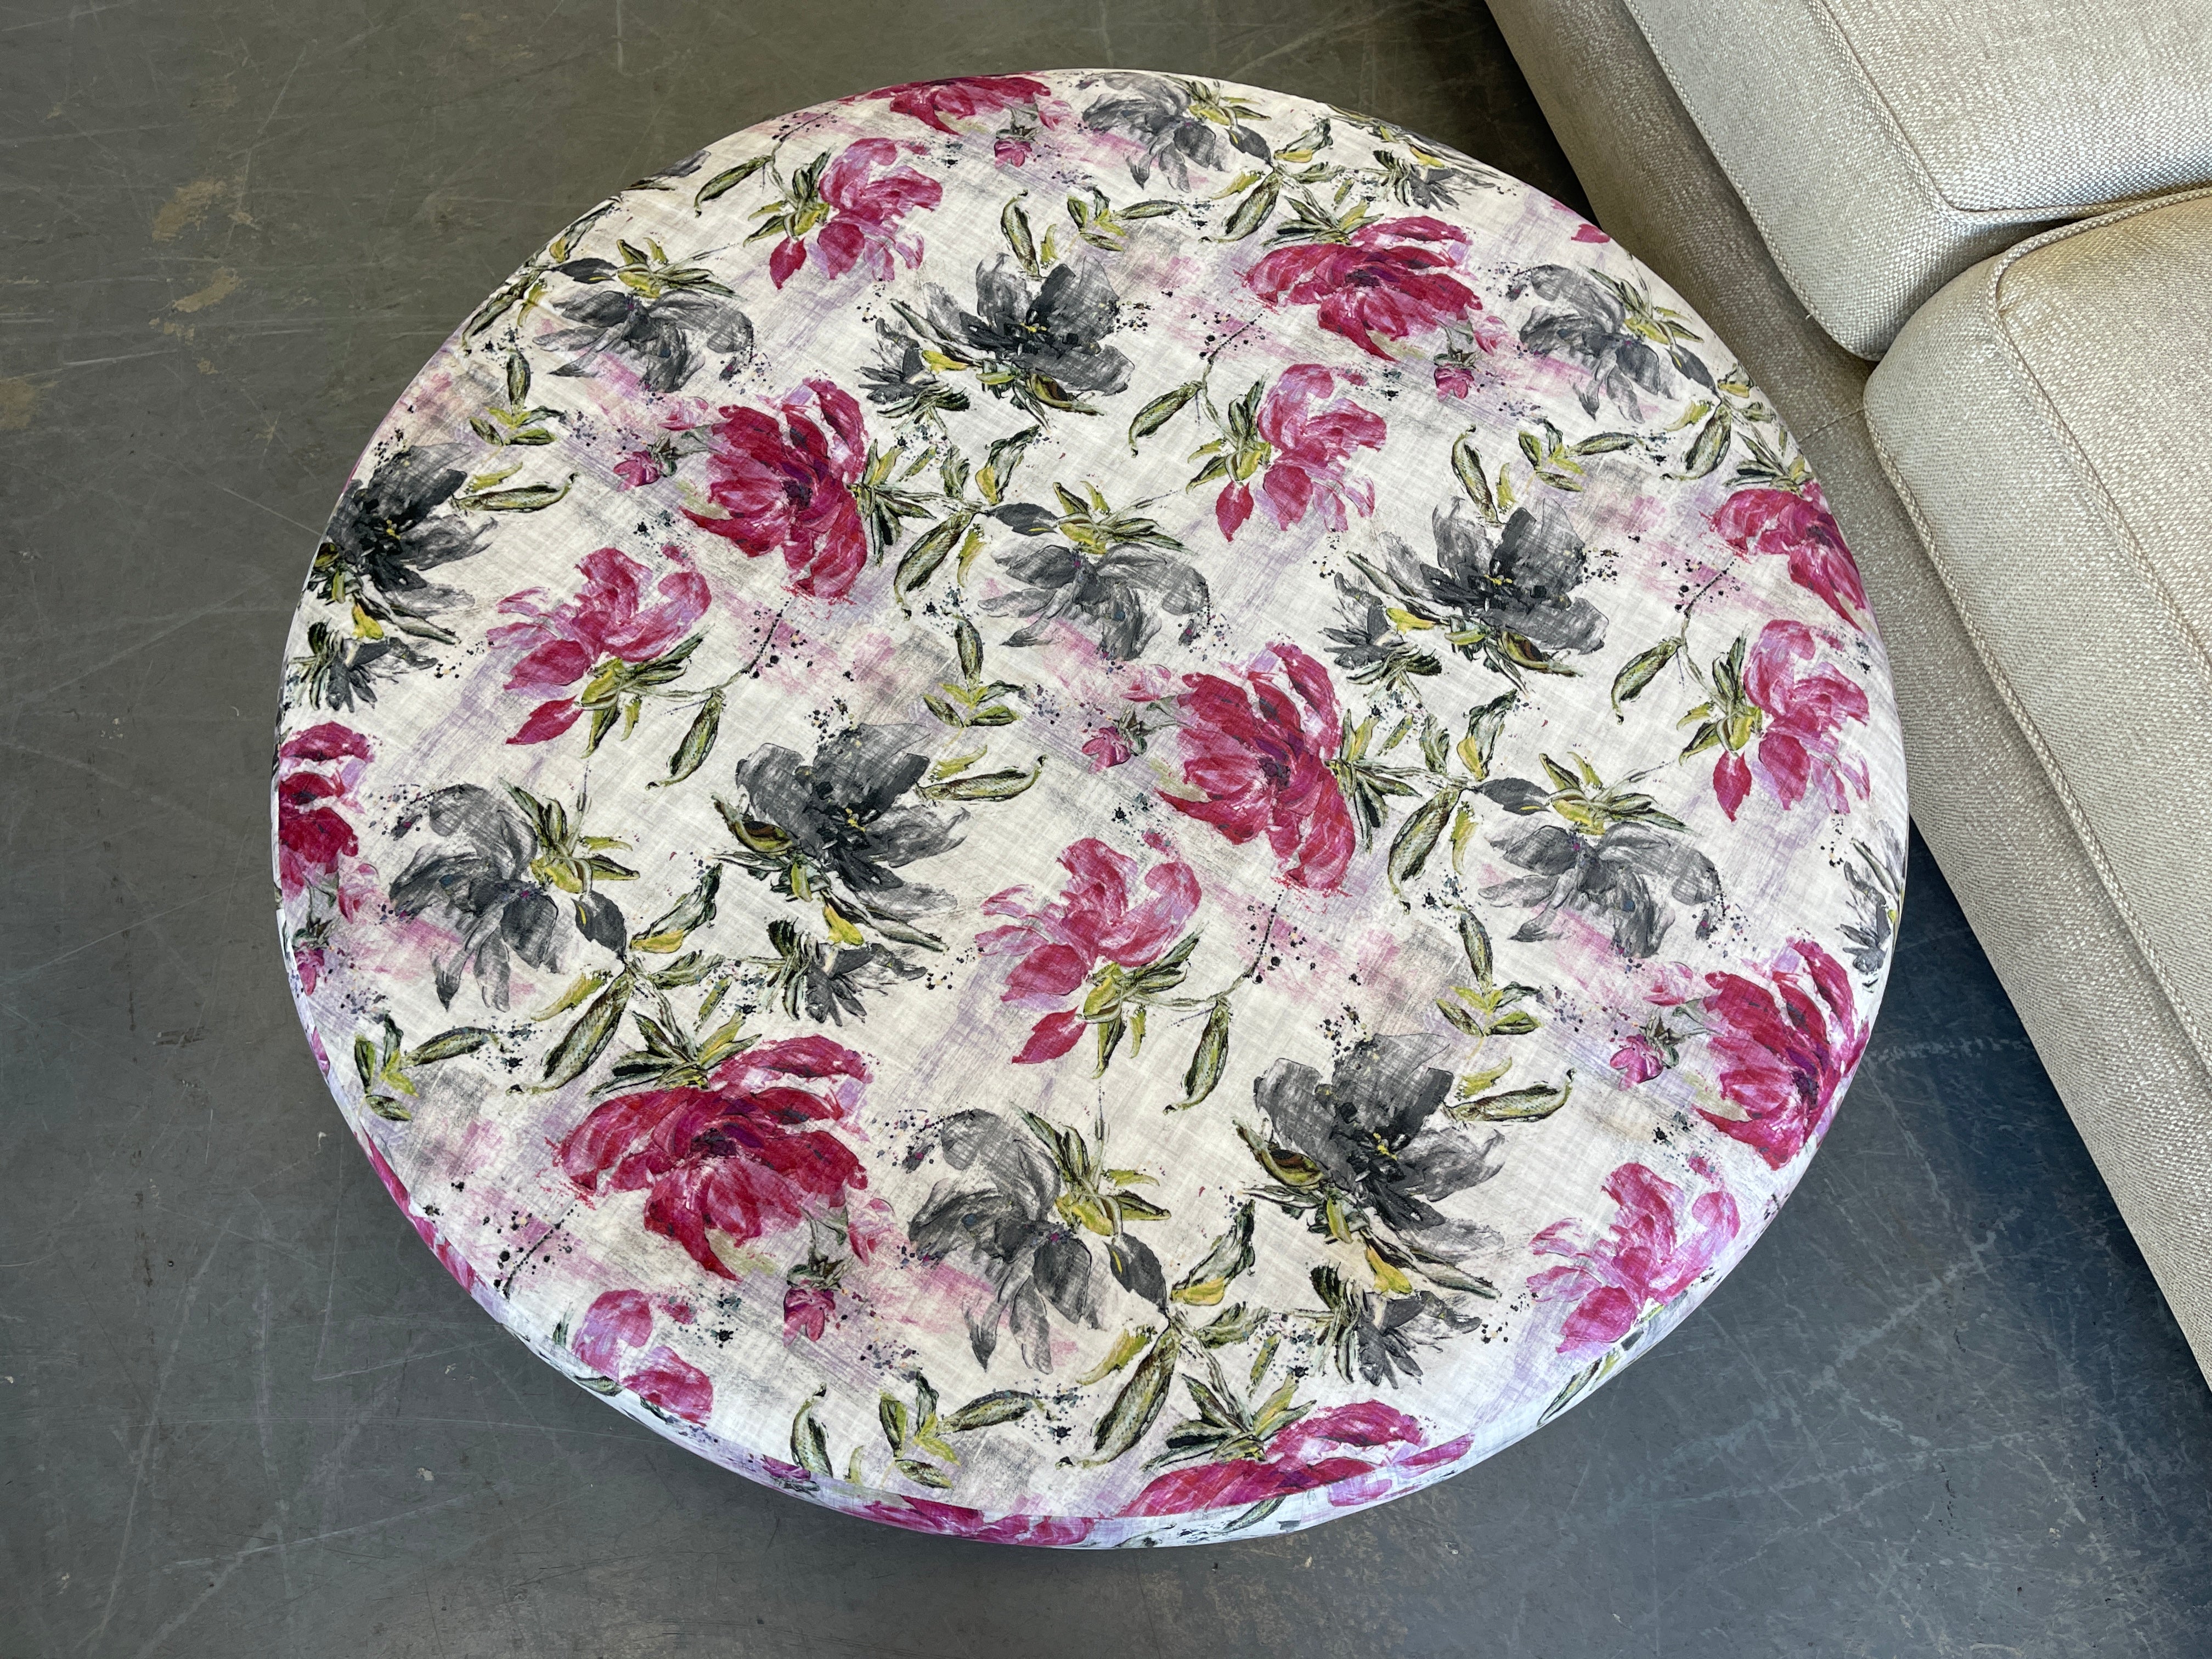 SOFOLOGY MAYA XL round footstool in floral velvet fabric